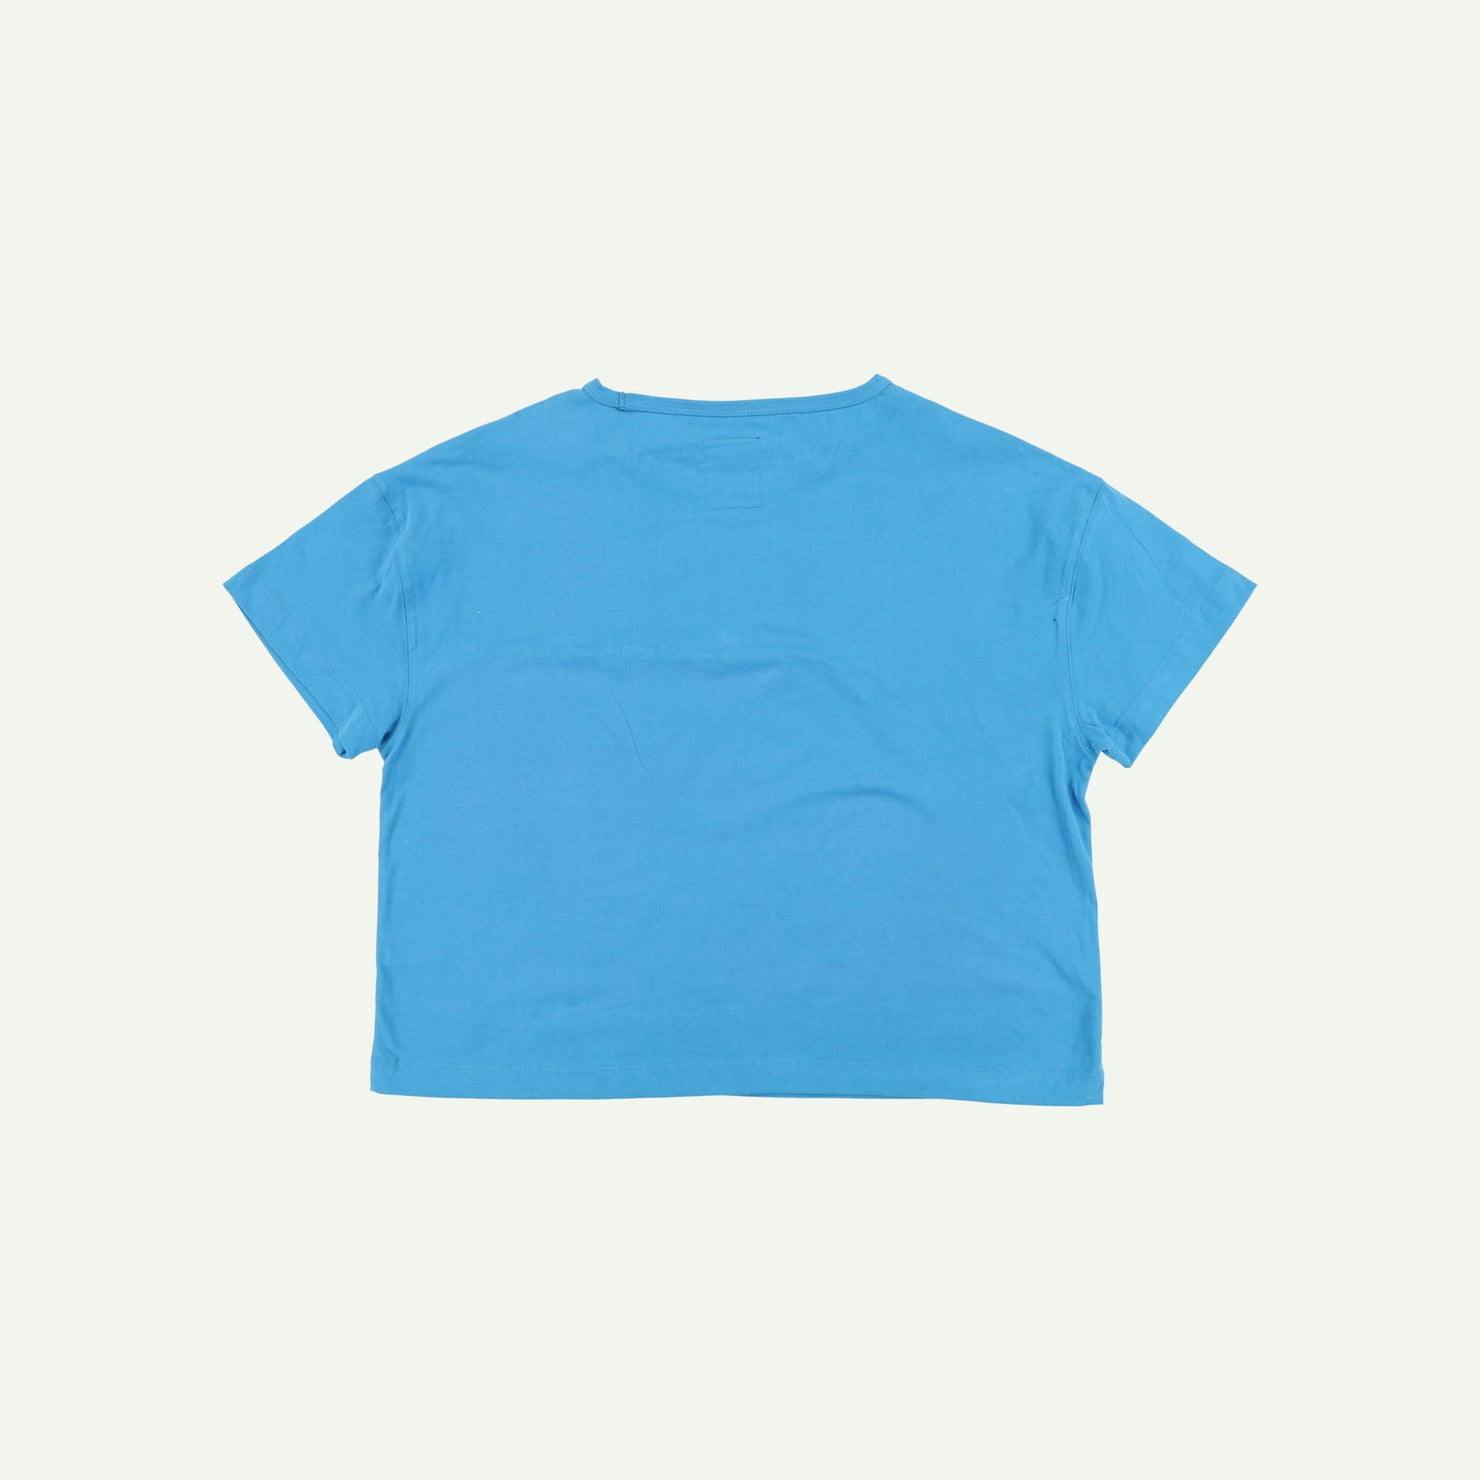 Finisterre As new Blue T-shirt